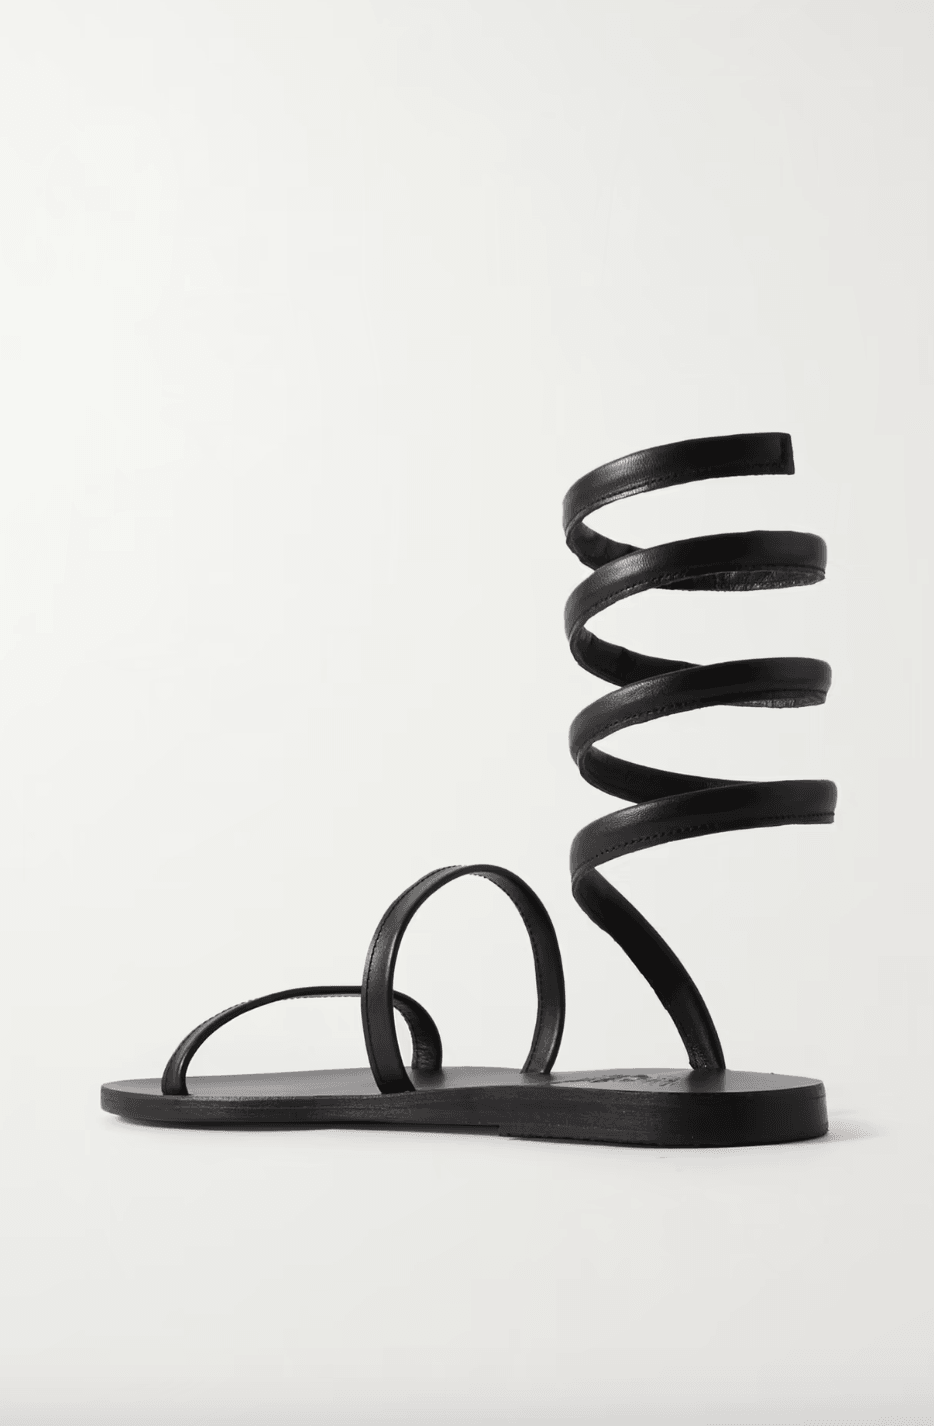 Handmade Ofis Leather Spiral Sandals - Endless